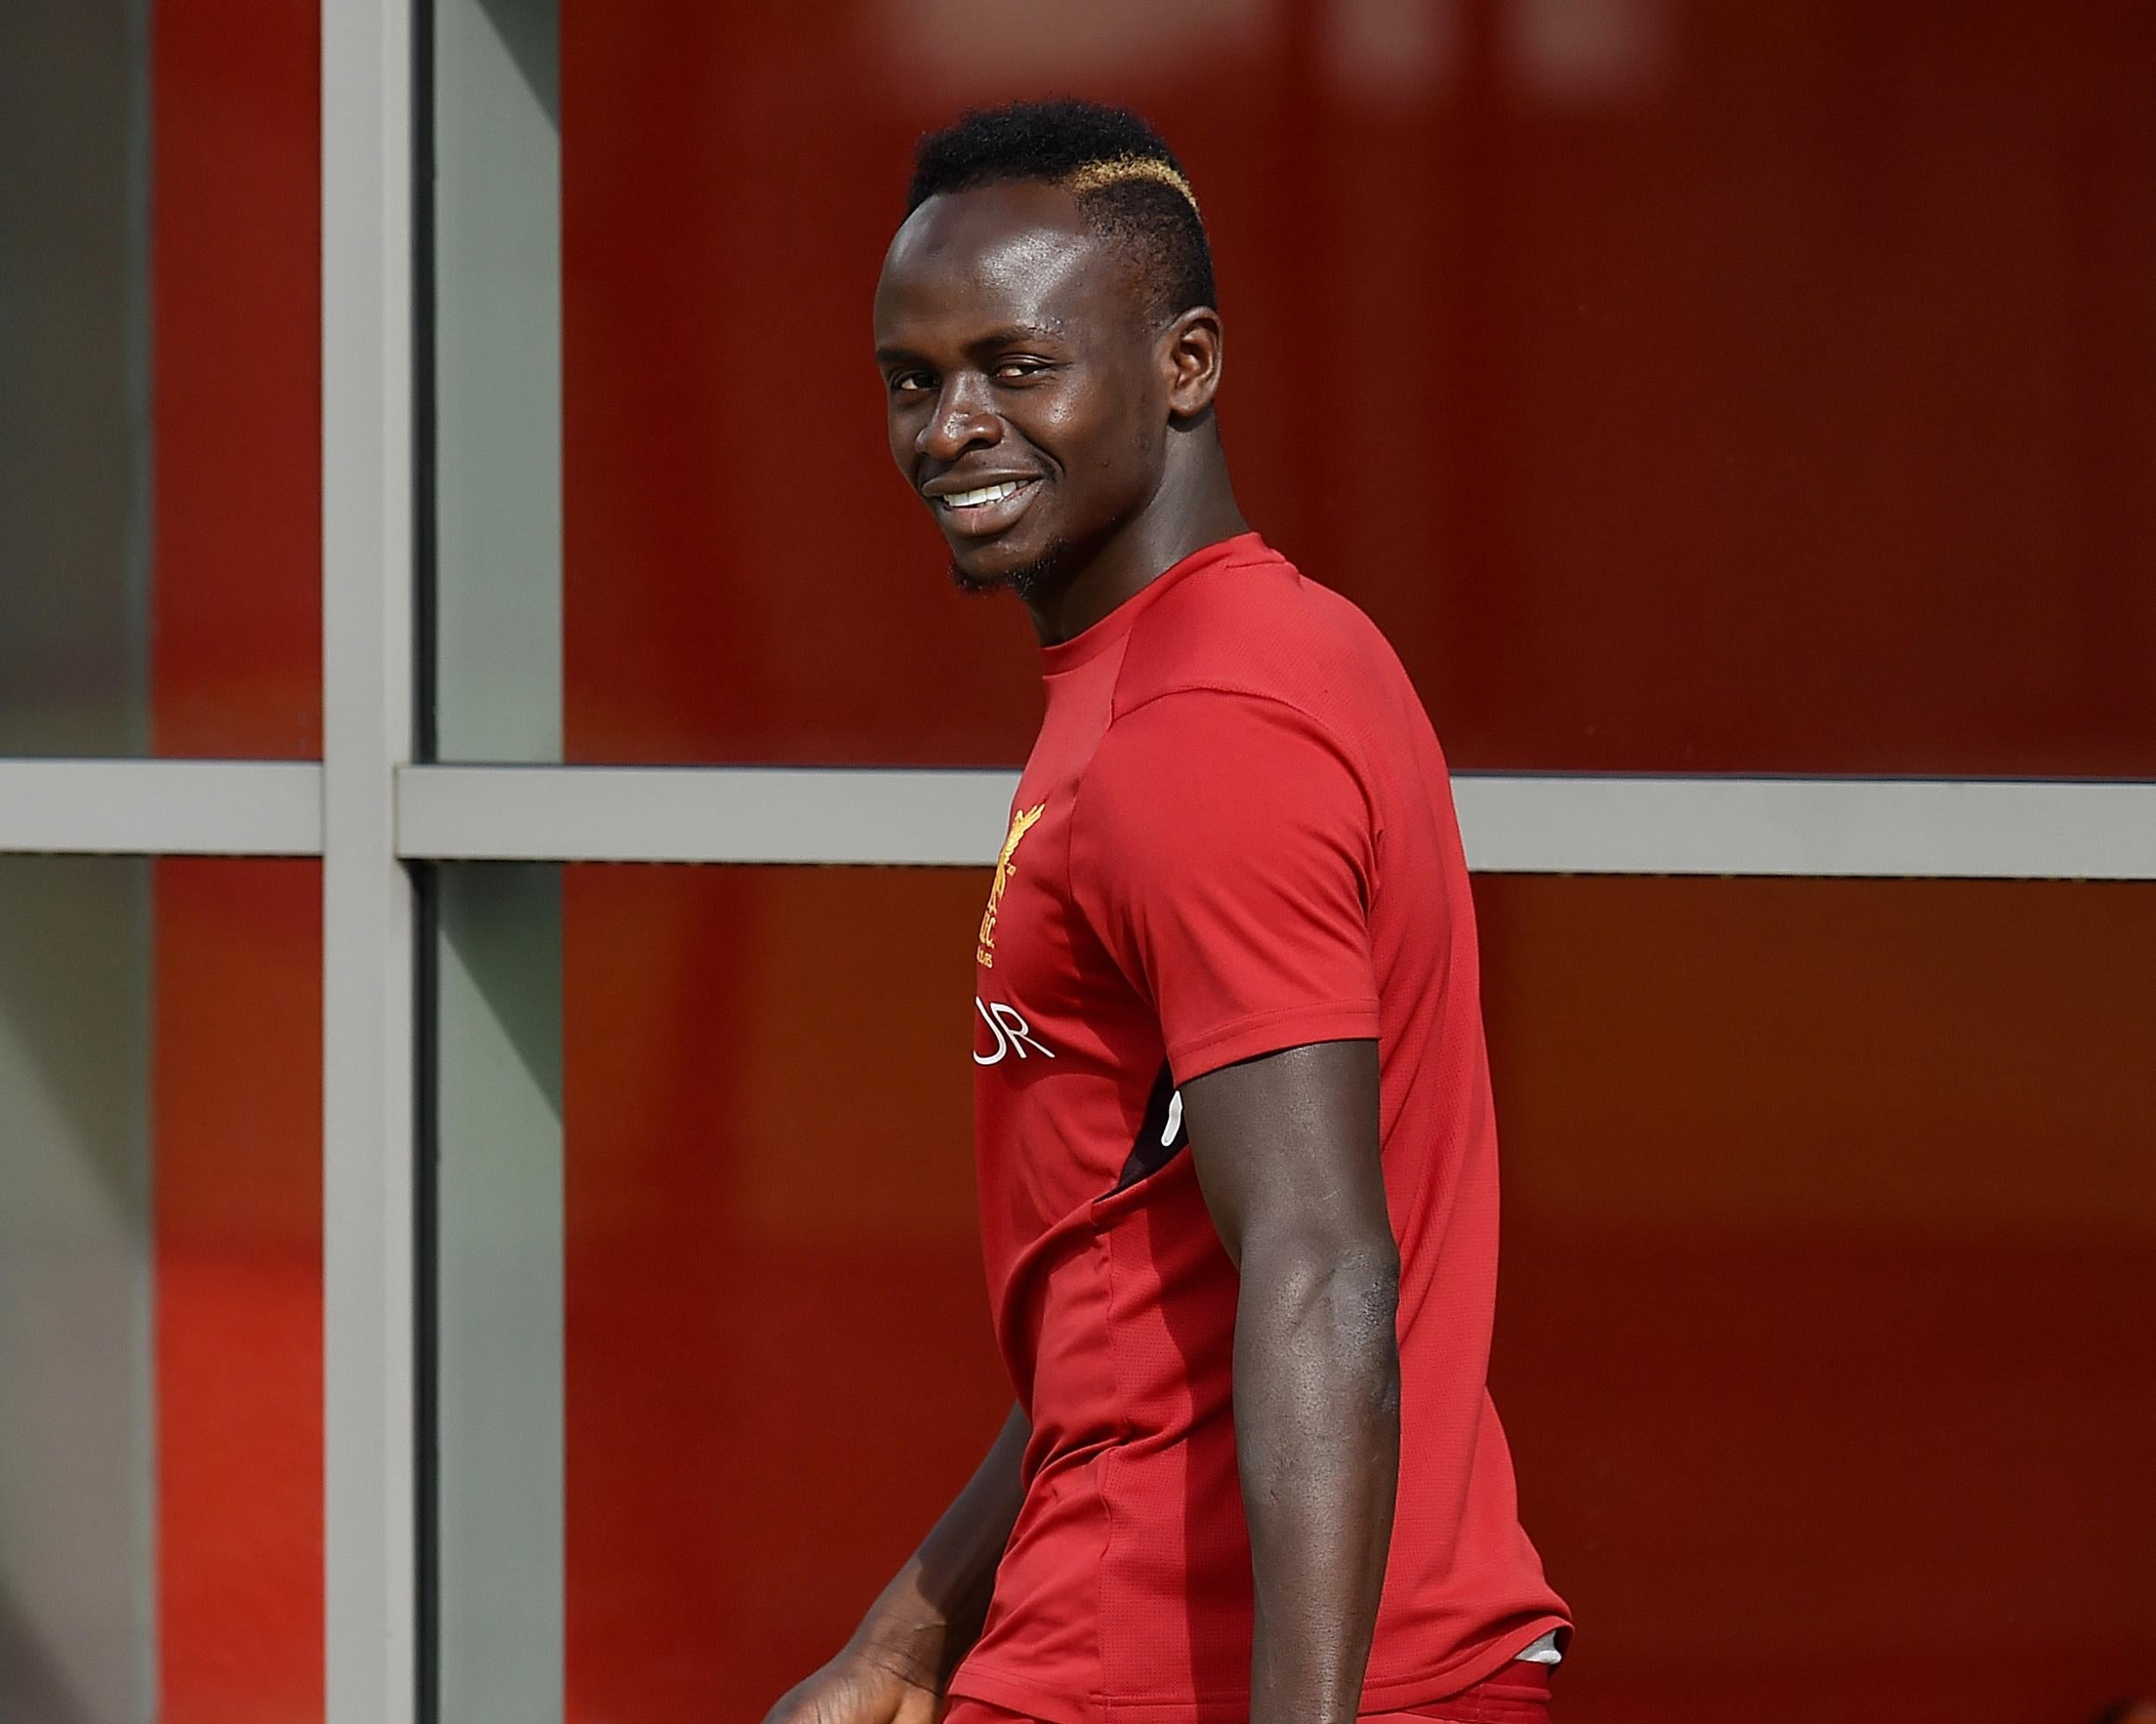 Mane has one game of his three match suspension remaining